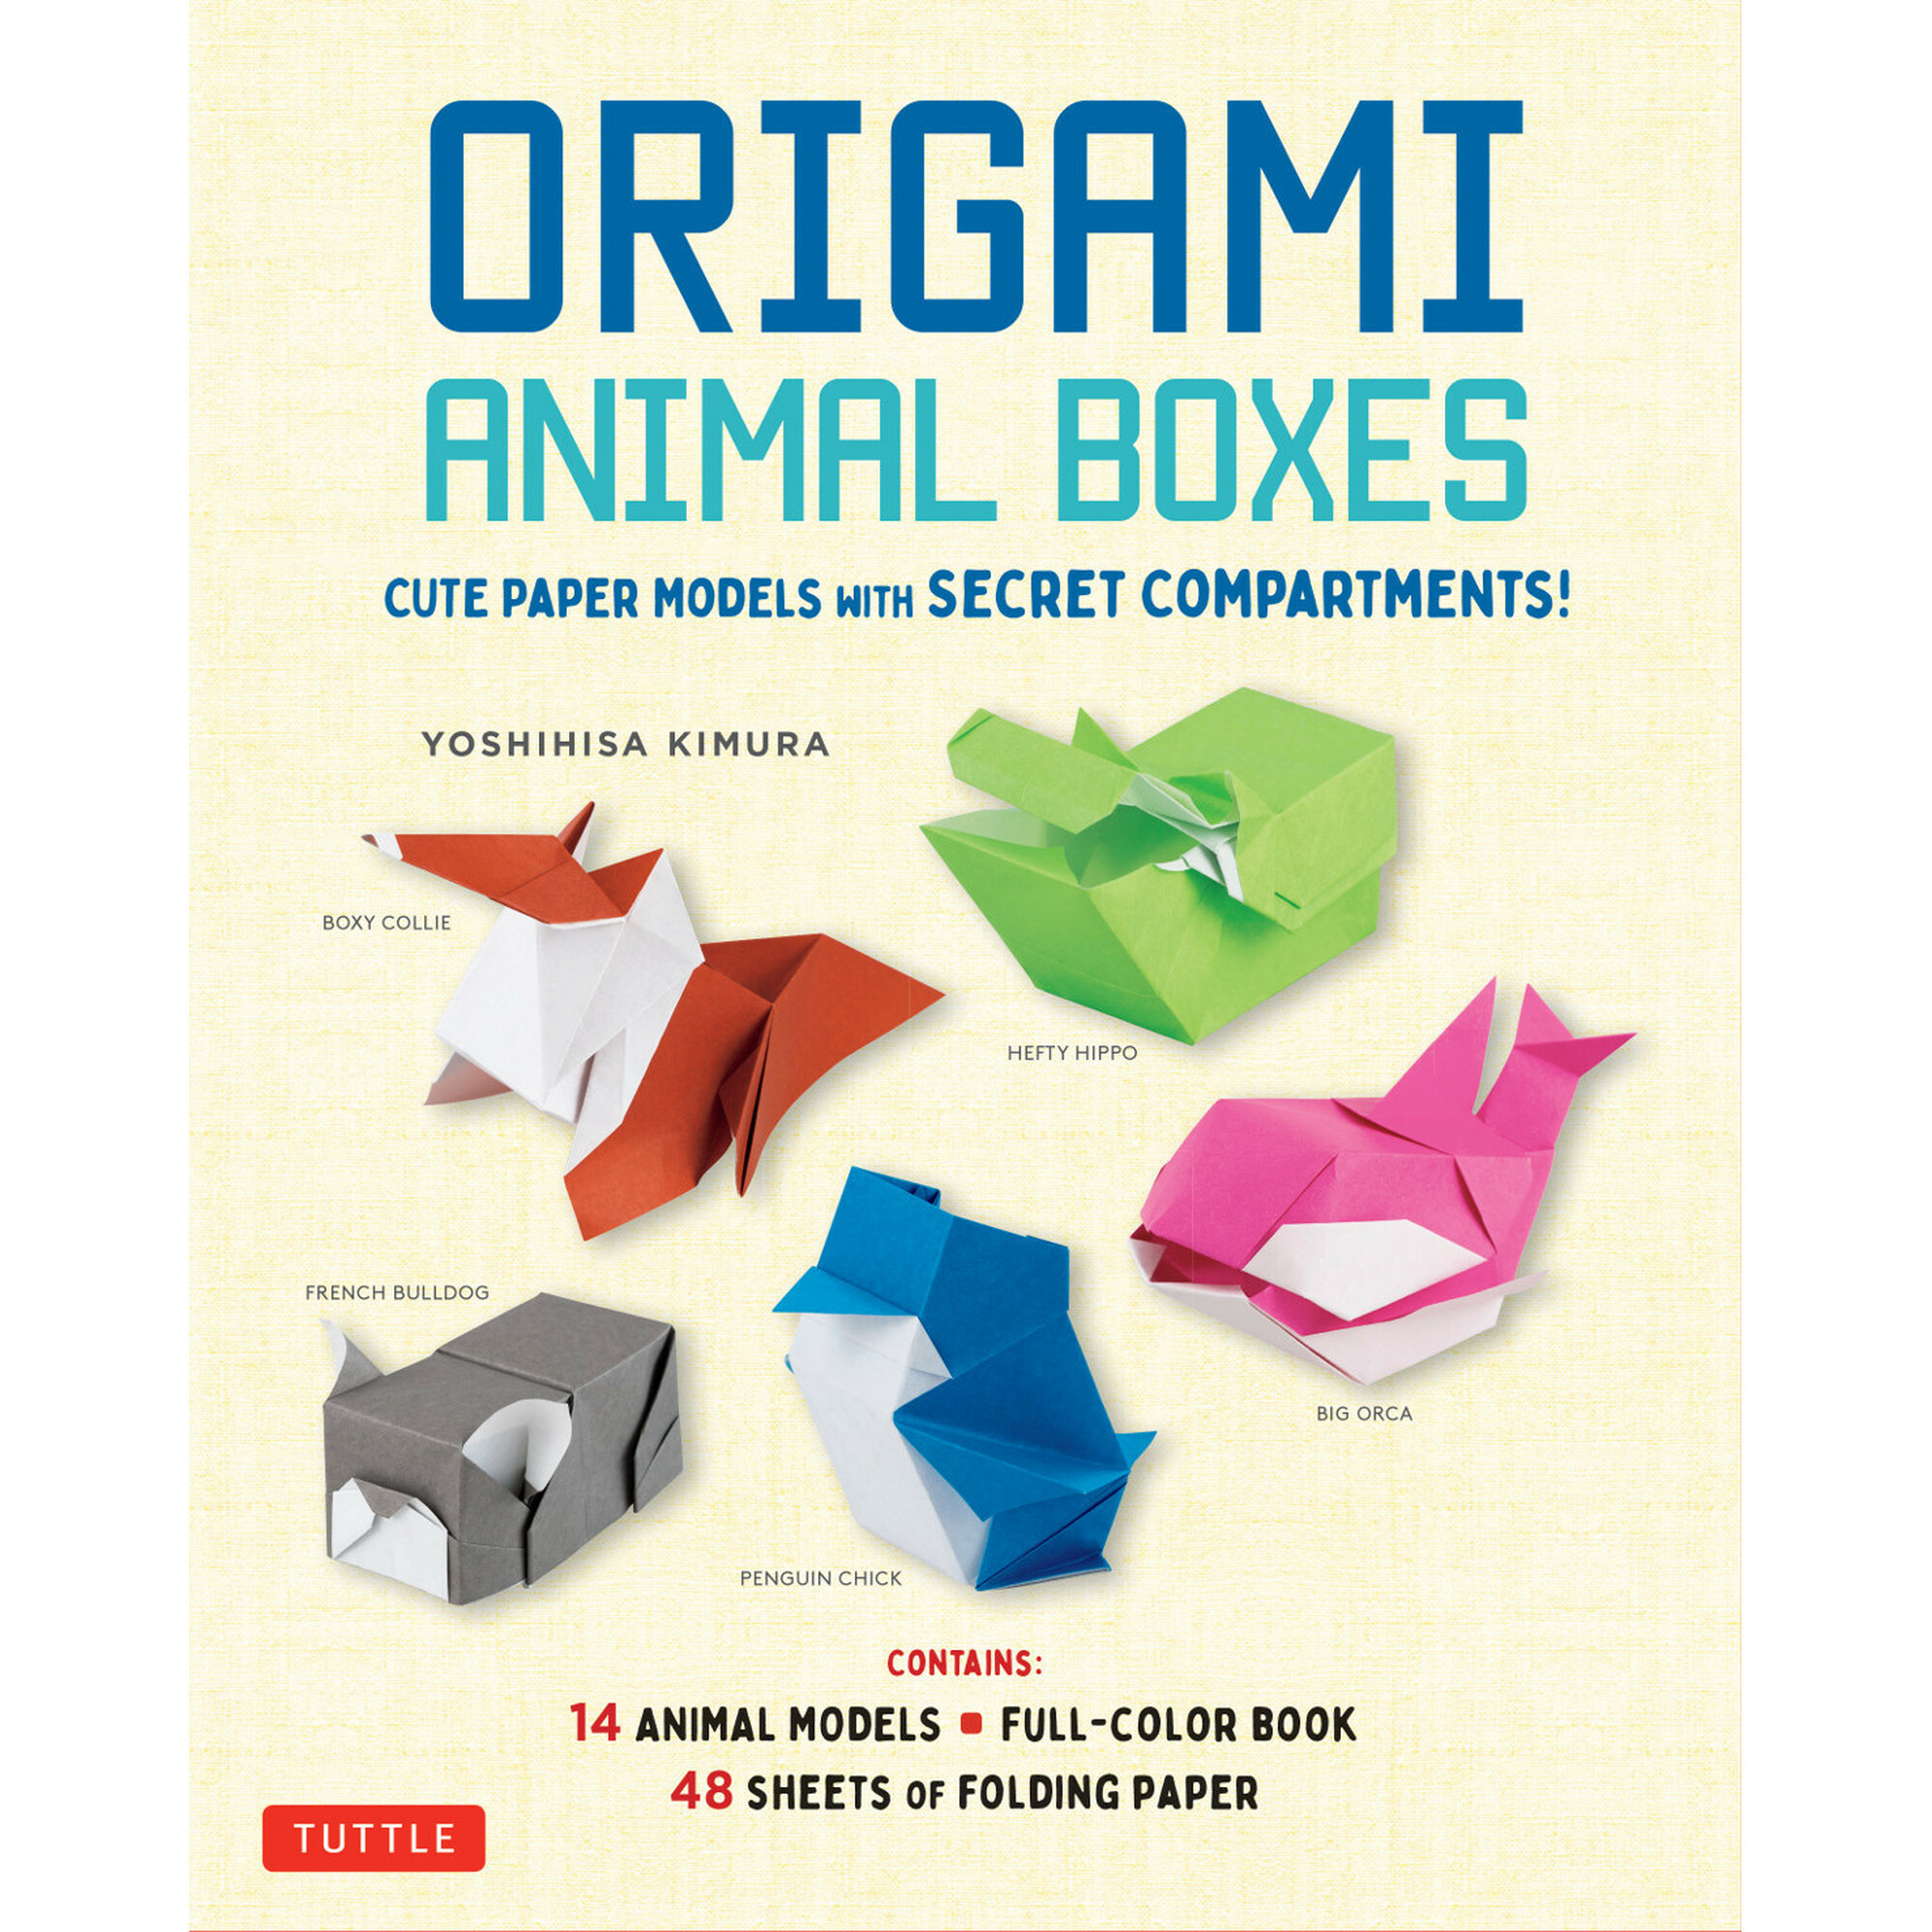 Origami Animal Boxes Kit: Cute Paper Models With Secret Compartments!